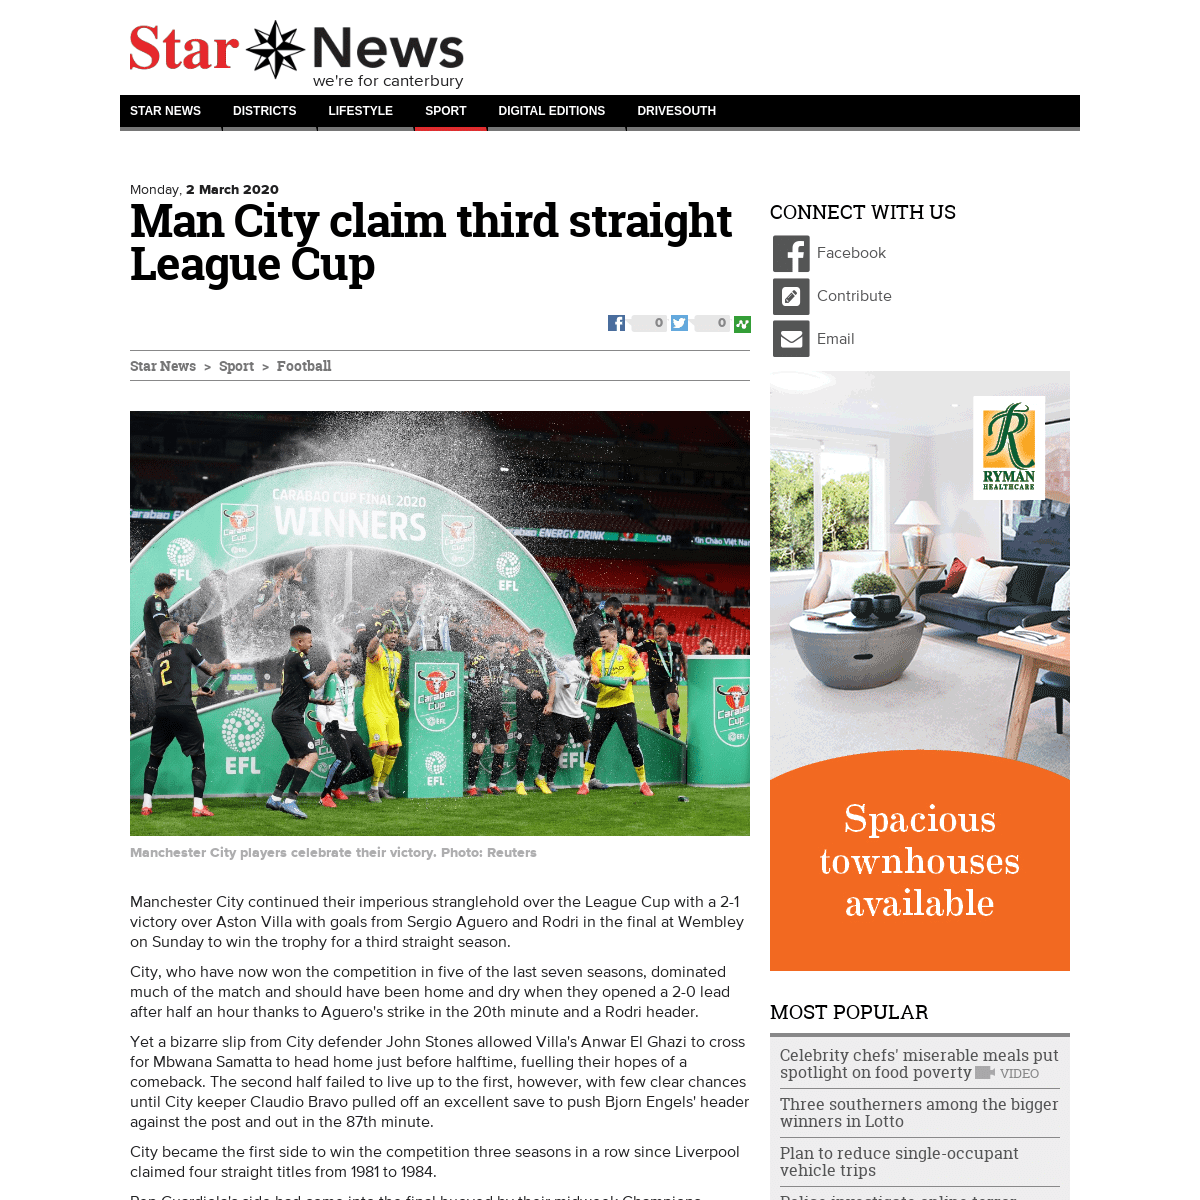 A complete backup of www.odt.co.nz/star-news/star-sport/star-football/man-city-claim-third-straight-league-cup